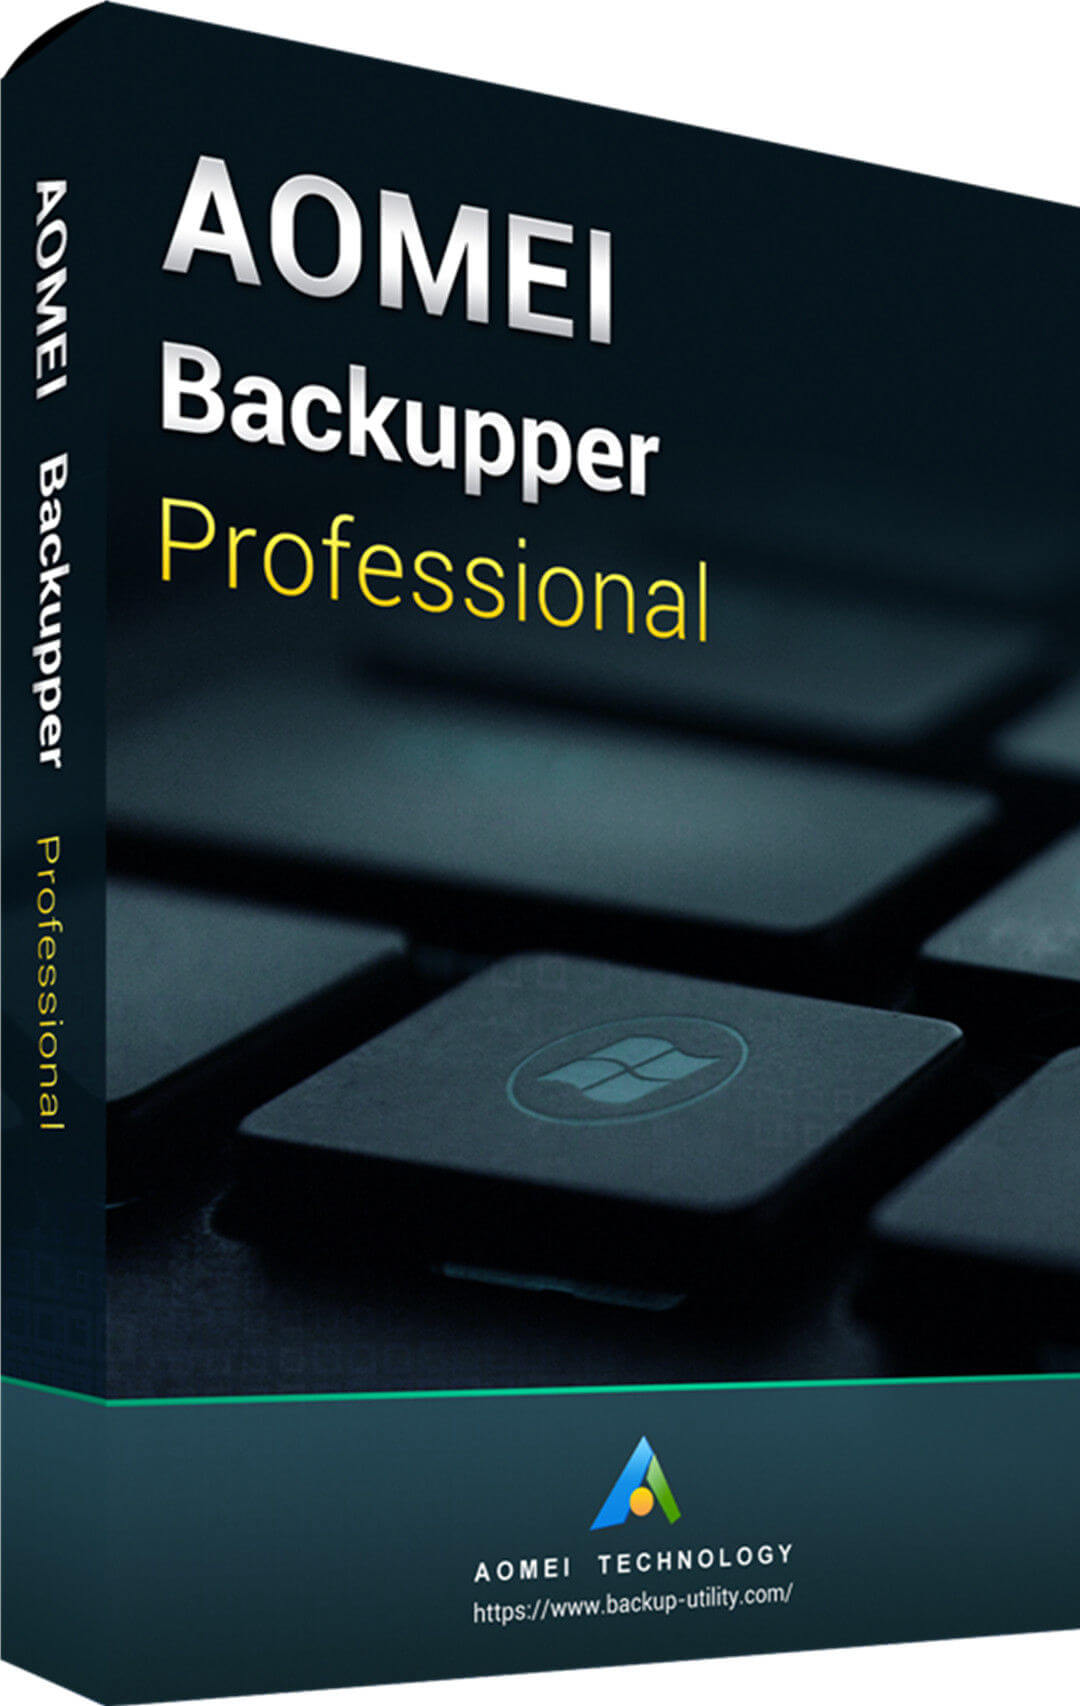 download the last version for android AOMEI Backupper Professional 7.3.1